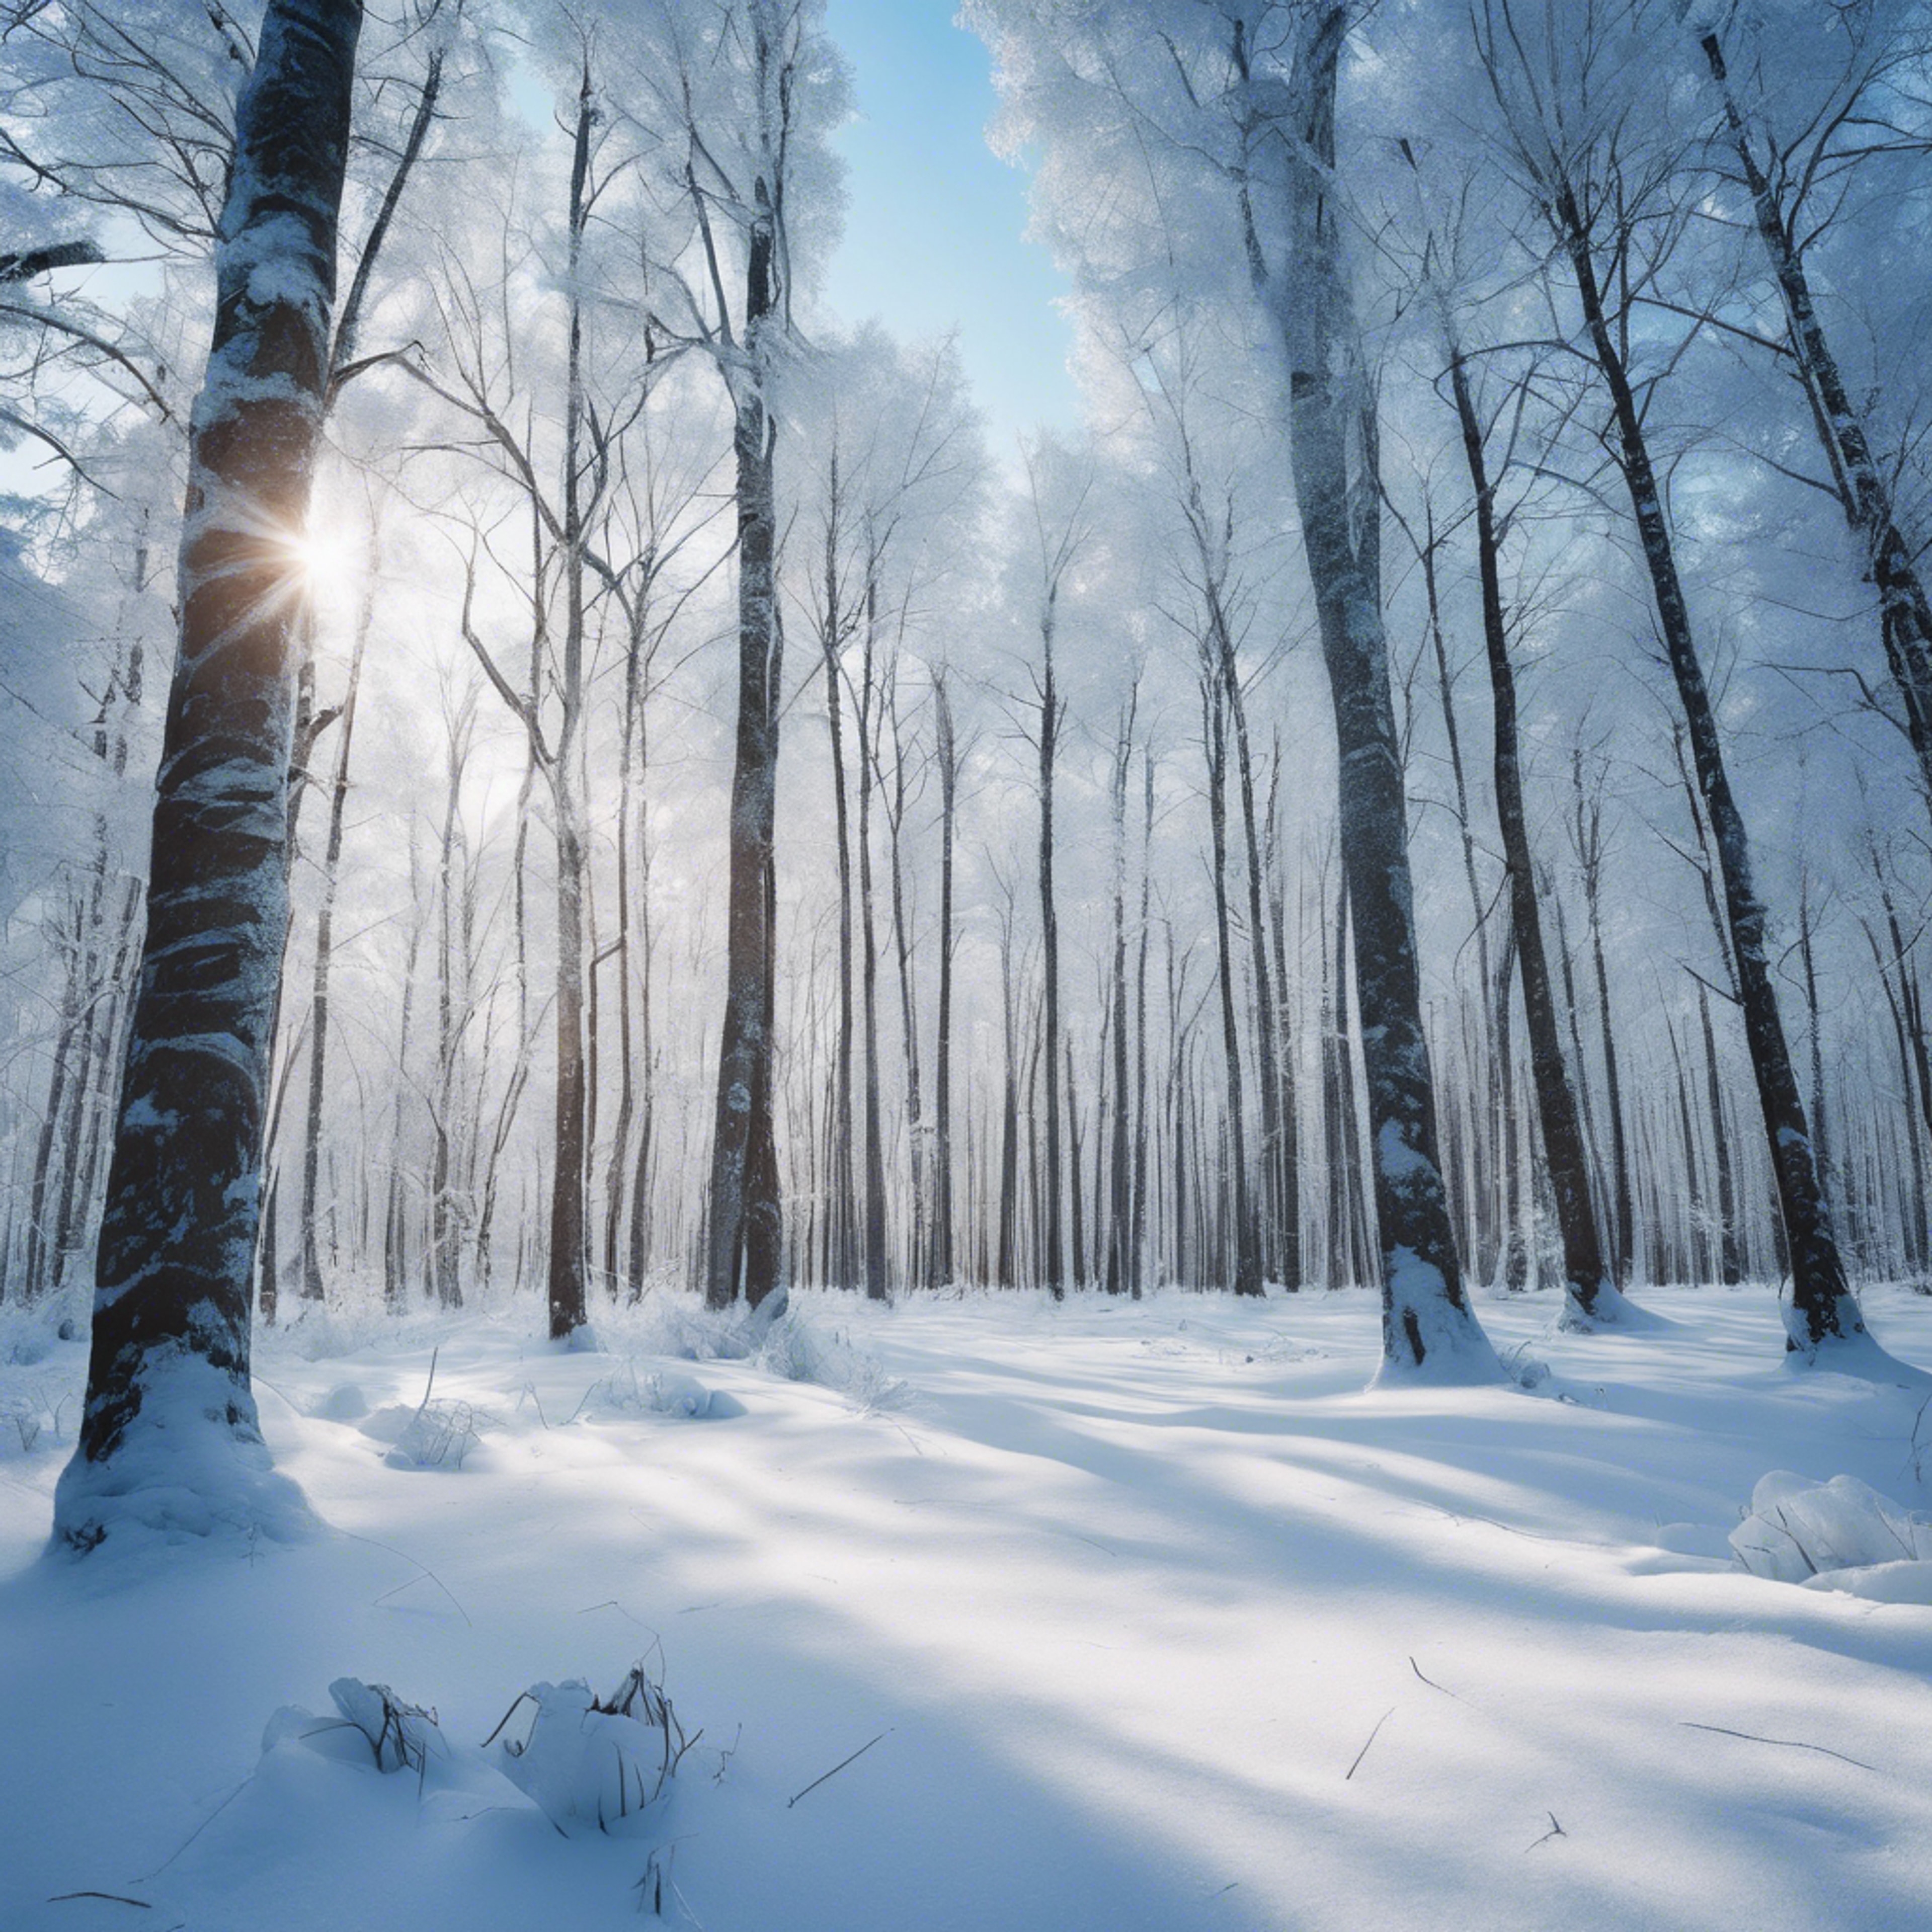 Landscape of a cold winter forest with blue shadows on pure white snow. Hintergrund[f6549bc56b8442c7ab62]